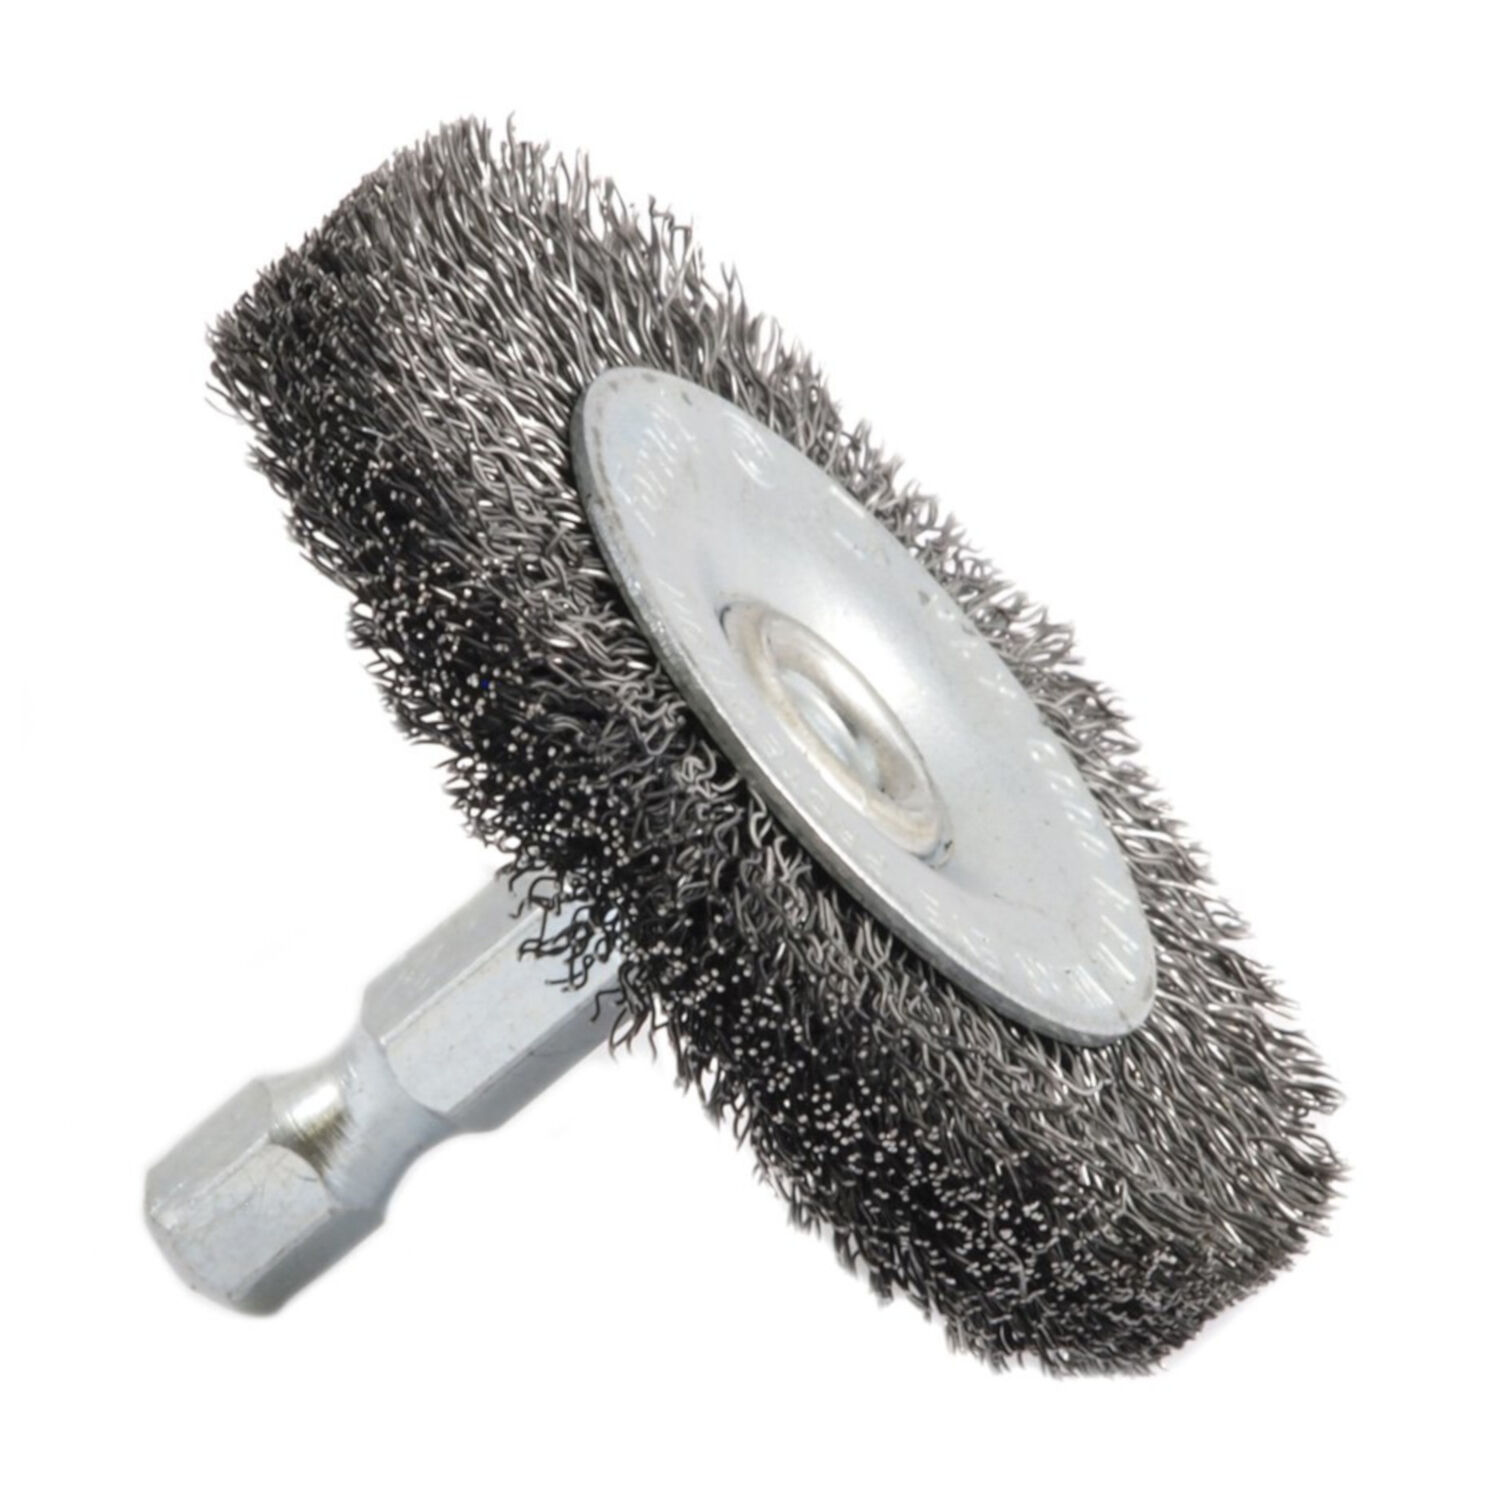 Forney  3 in Crimped  Wire Wheel Brush  Metal  6000 rpm 1 pc. 